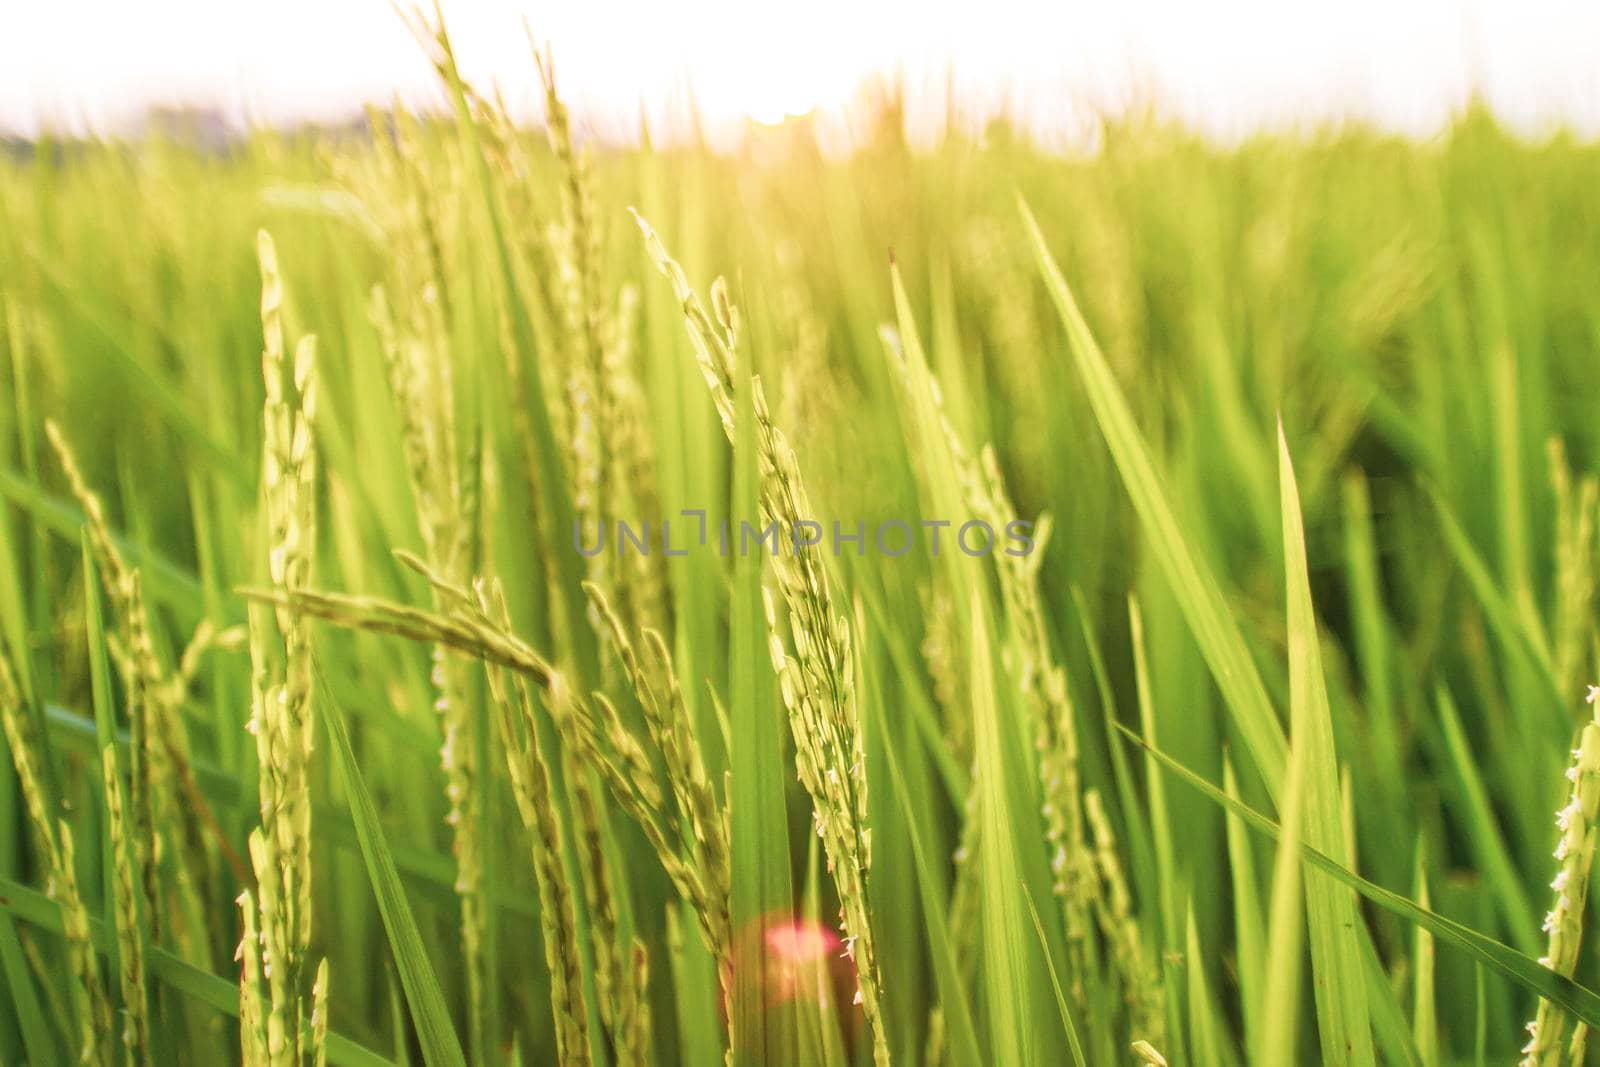 Rice field in the morning. Wheat close up. Beautiful Nature Sunset Landscape. Rural Scenery under Shining Sunlight. Background of ripening ears of meadow wheat field. Rich harvest Concept. Ads